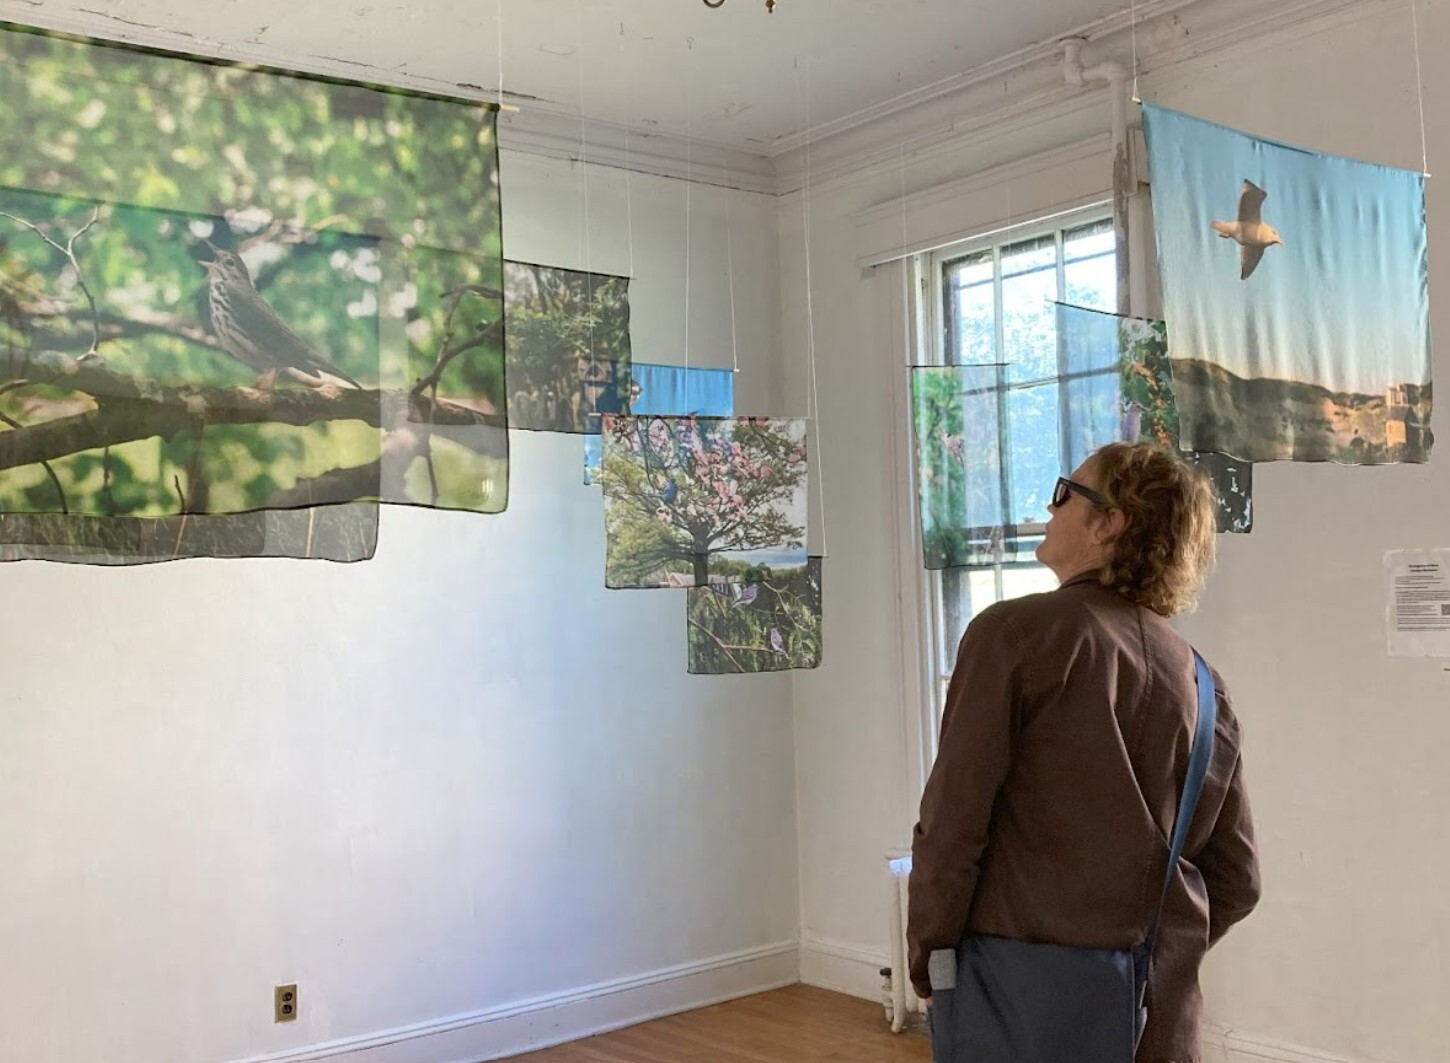 As part of the "Divergence of Birds" exhibit, Carolyn Monastra’s photographs hang on silk banners inside our Governors Island seasonal environmental center. Photo: NYC Bird Alliance